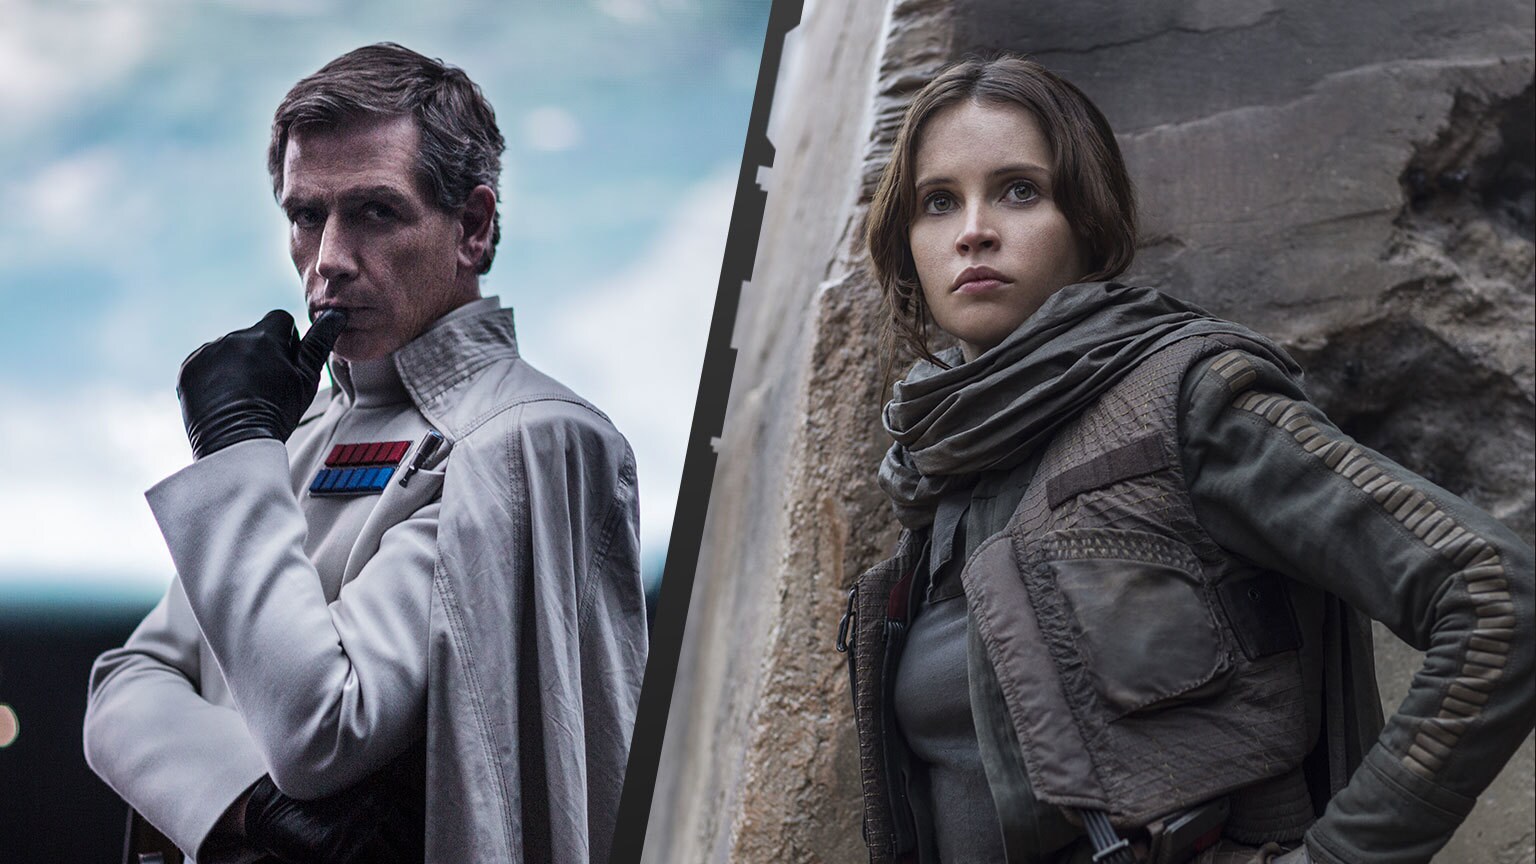 Quiz: Are You More Jyn Erso or Orson Krennic?